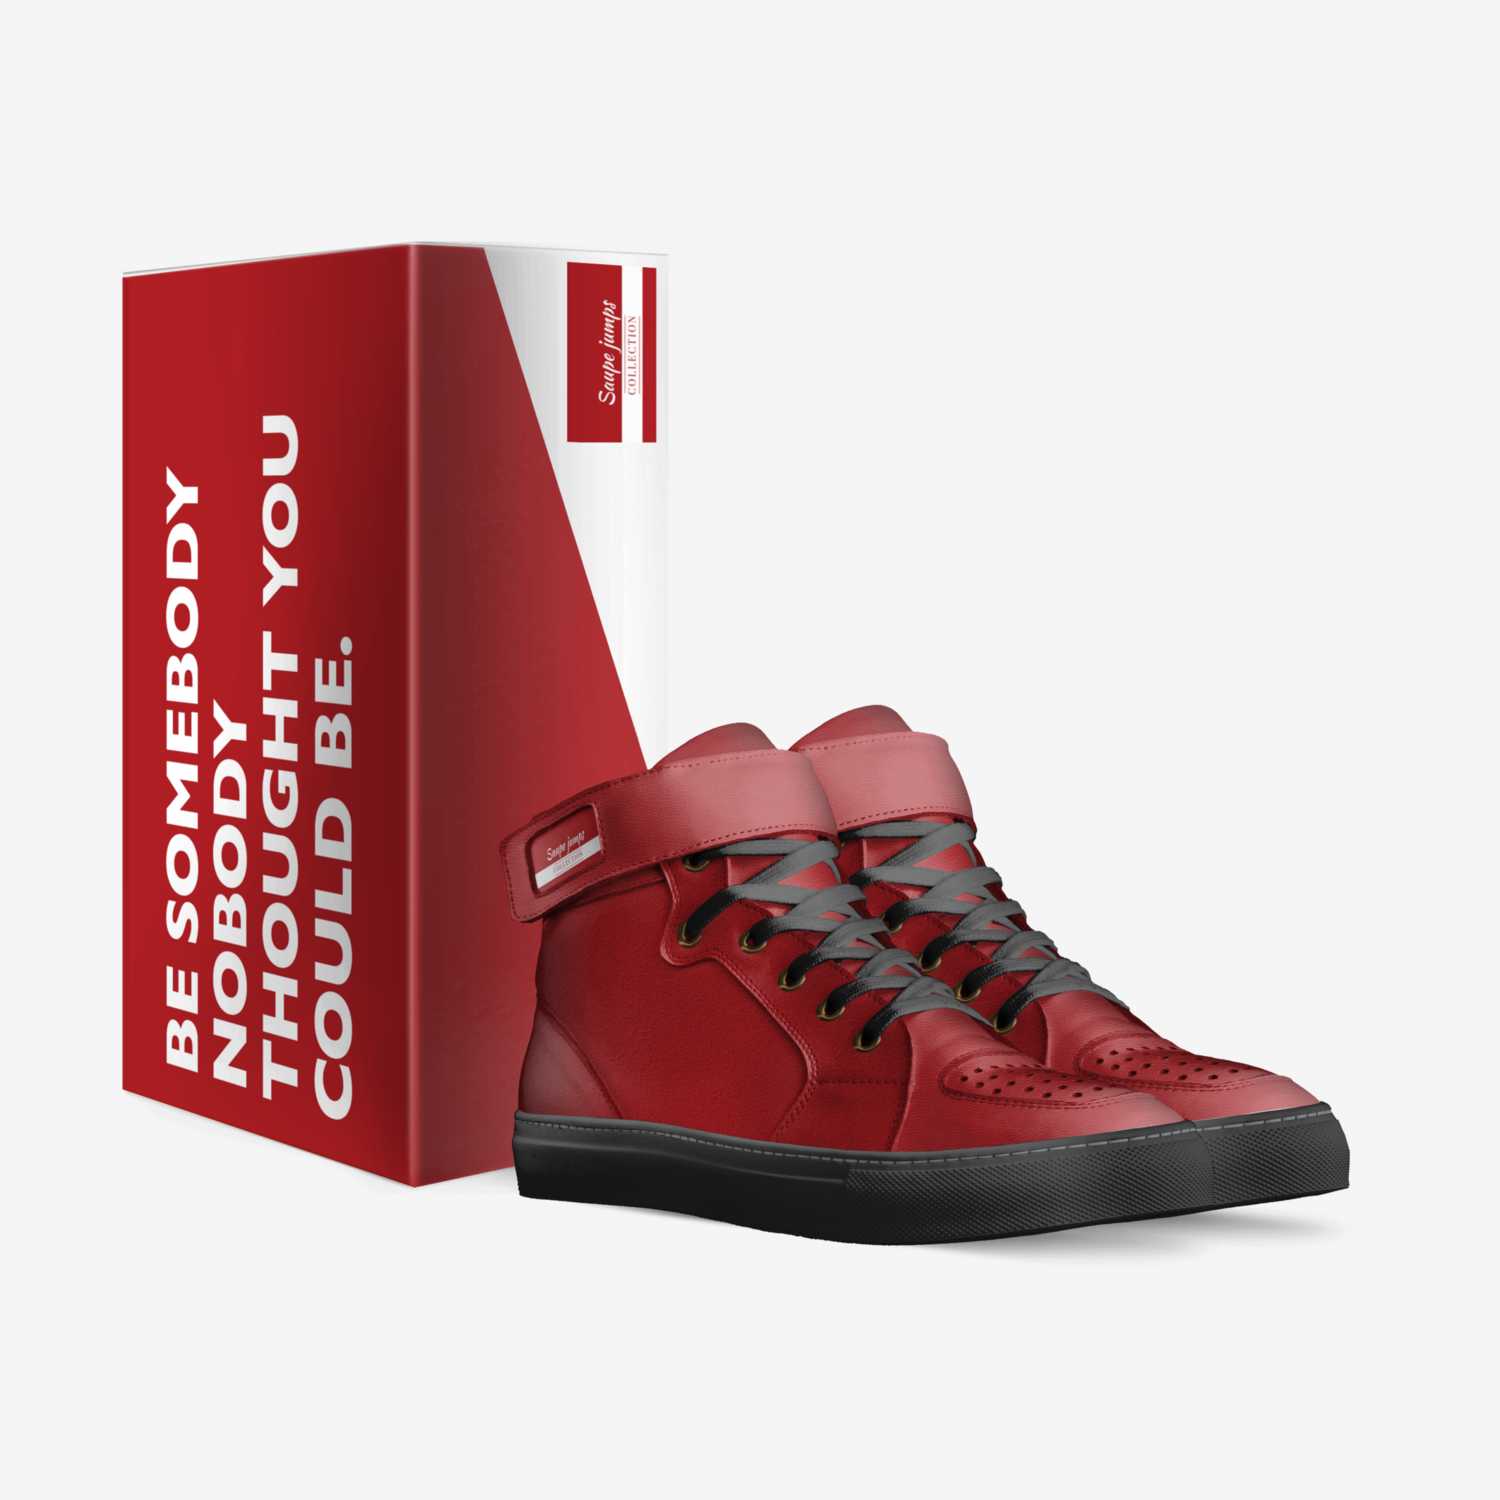 Saupe jumps custom made in Italy shoes by Jacob Lee Saupe | Box view